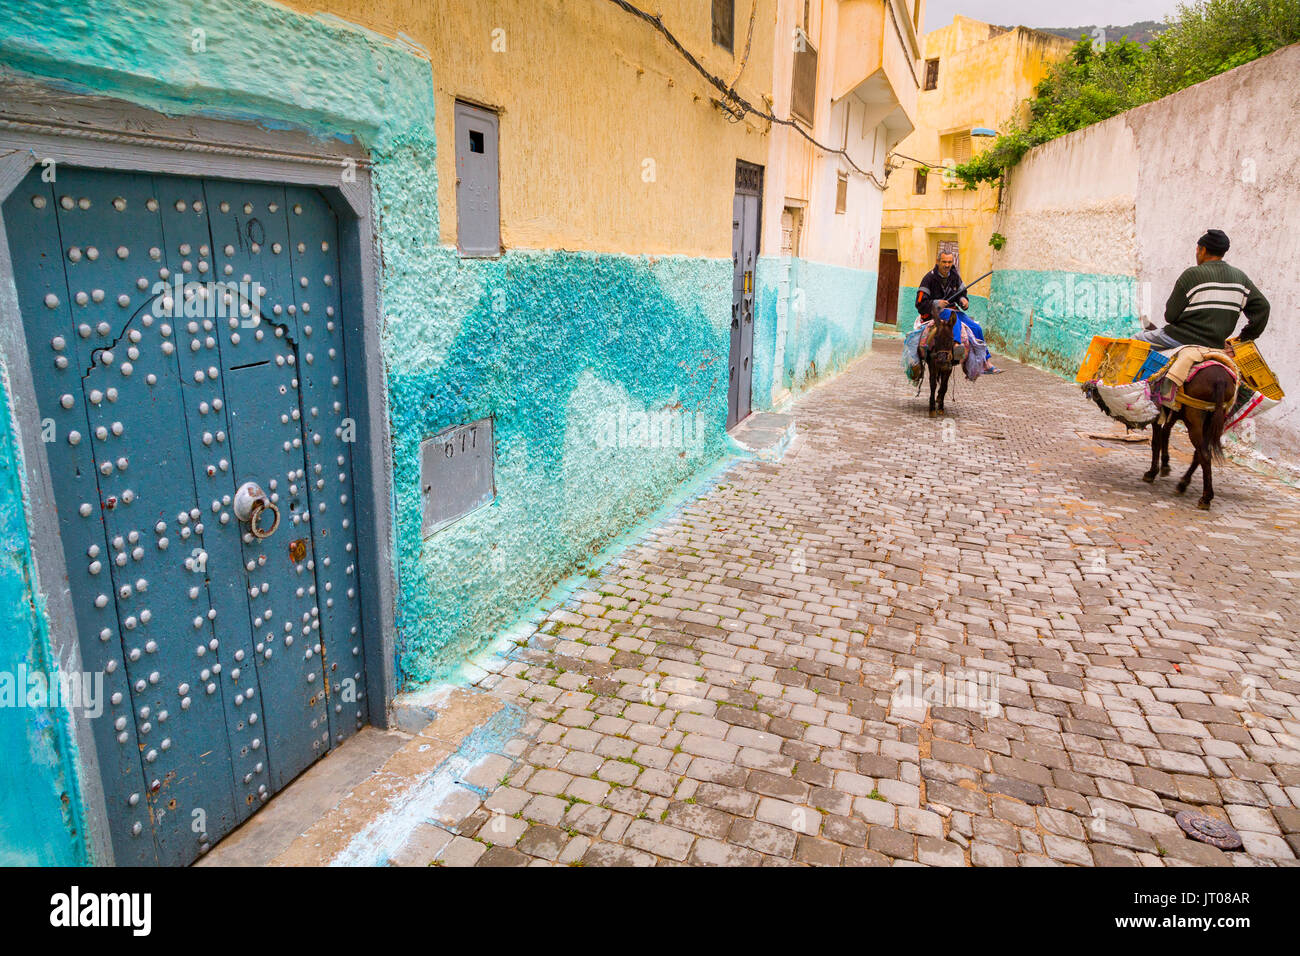 Traditional blue door of a house. Man riding a donkey, Street life scene, Moulay Idriss. Morocco, Maghreb North Africa Stock Photo